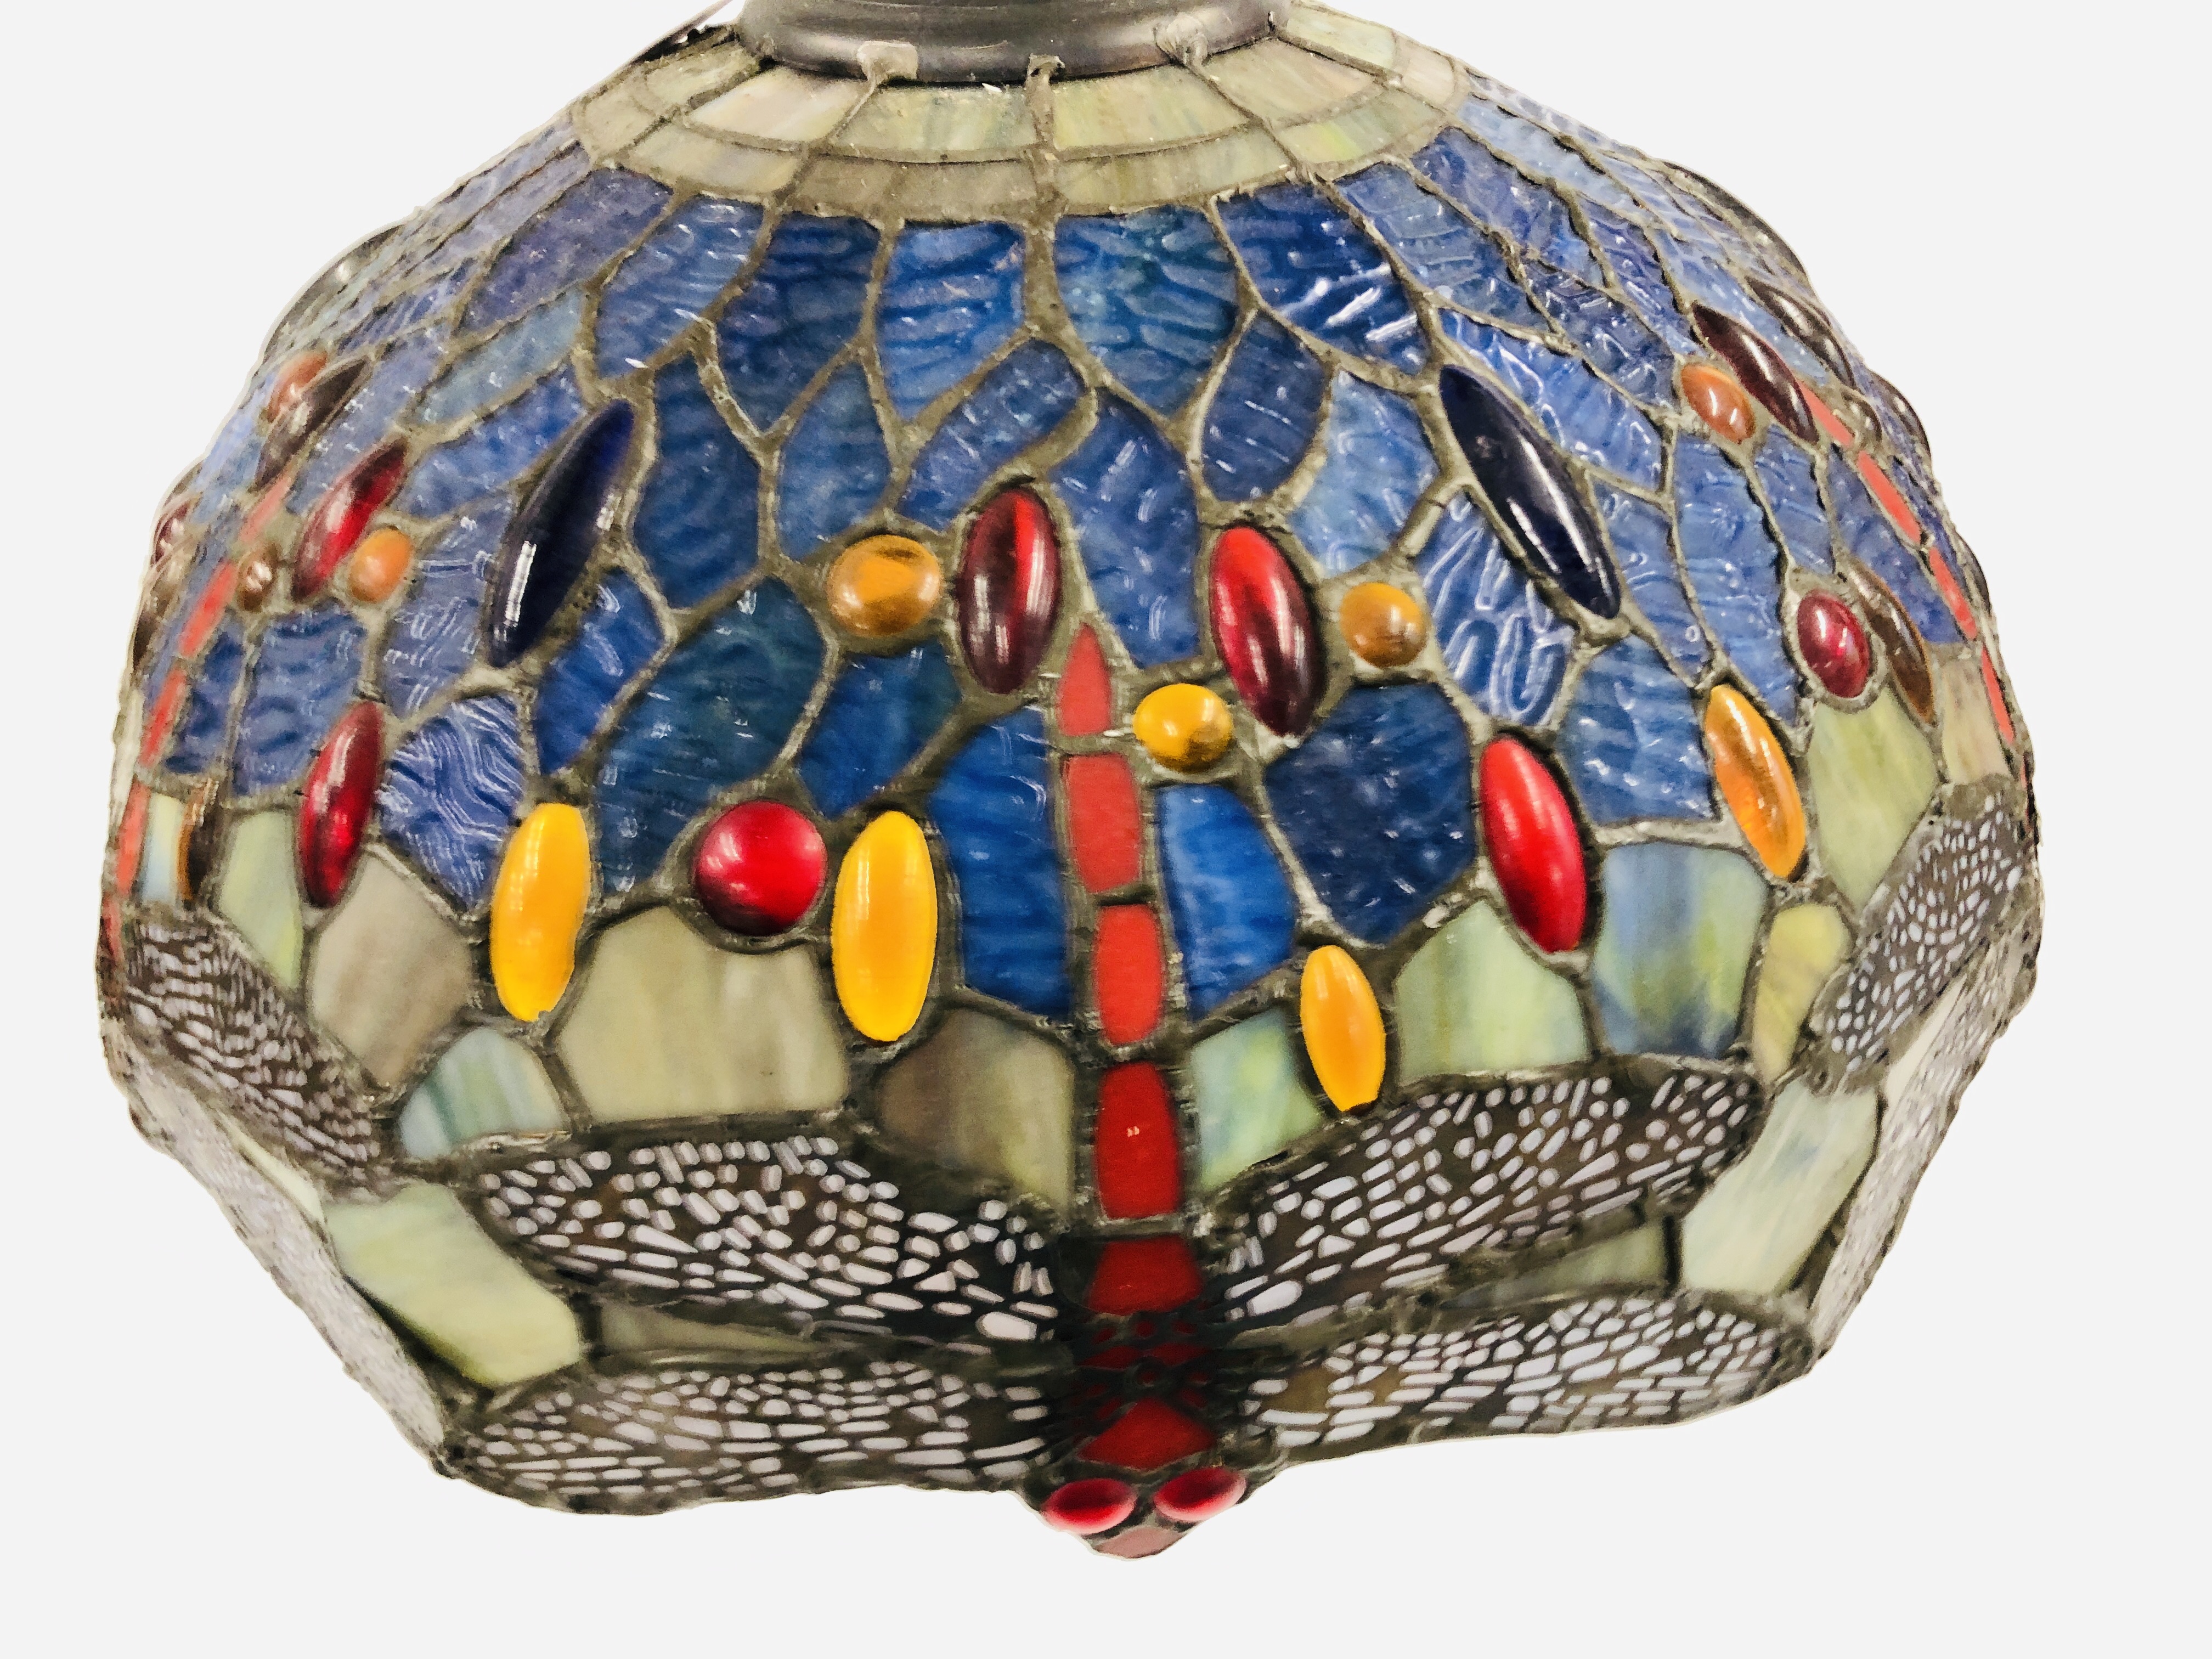 A TIFFANY STYLE STAINED GLASS DRAGONFLY CEILING LIGHT DIA. 40CM. - Image 4 of 7